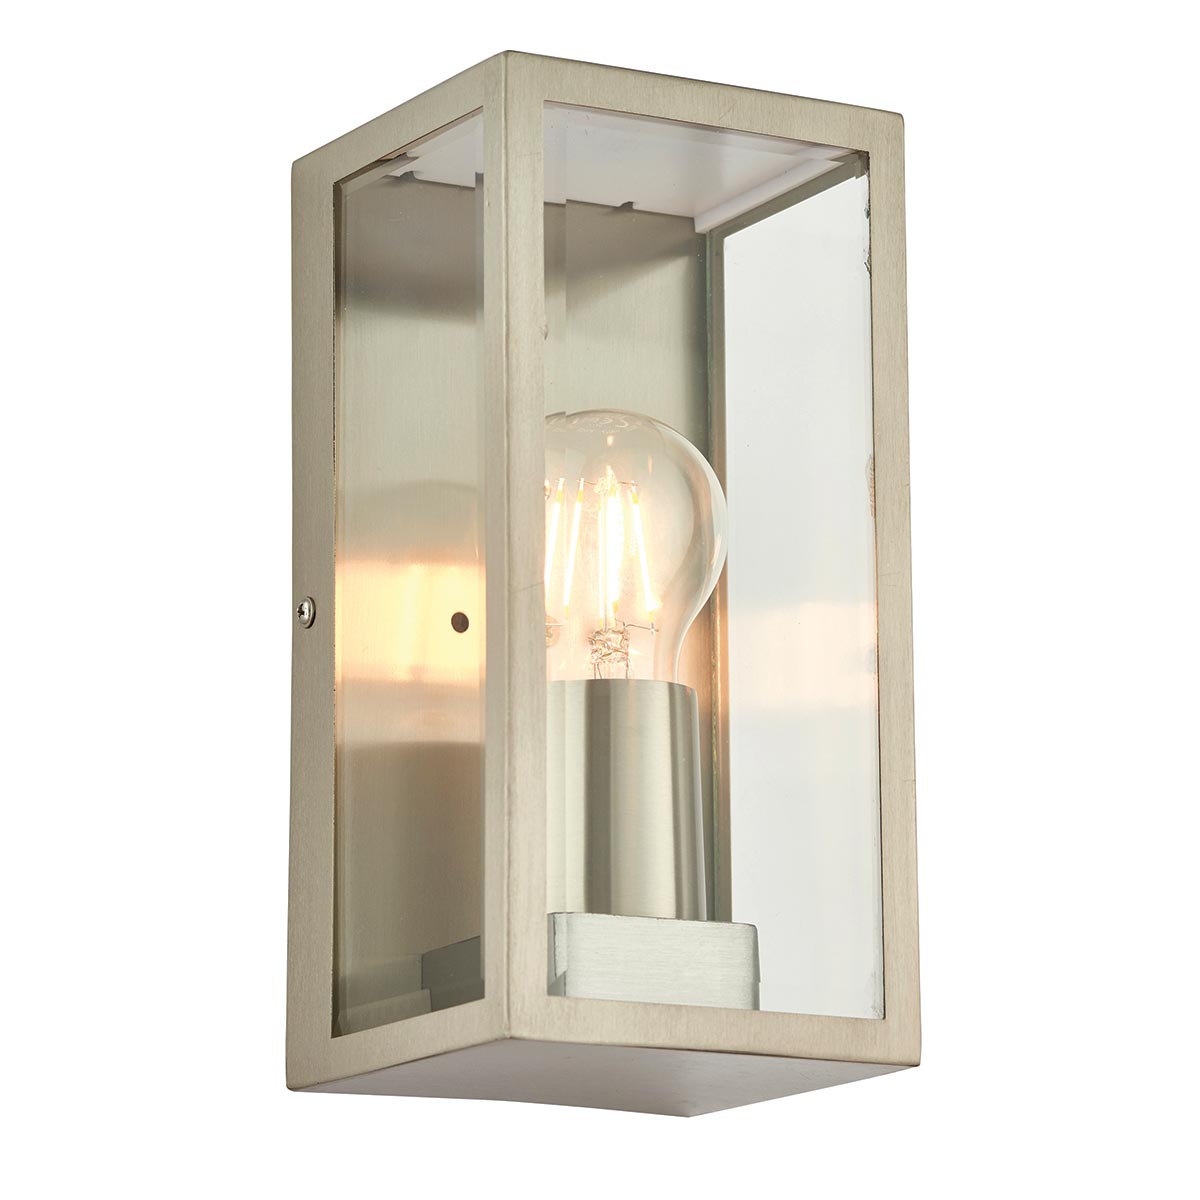 Endon Oxford Outdoor Wall Box Lantern Stainless Steel IP44